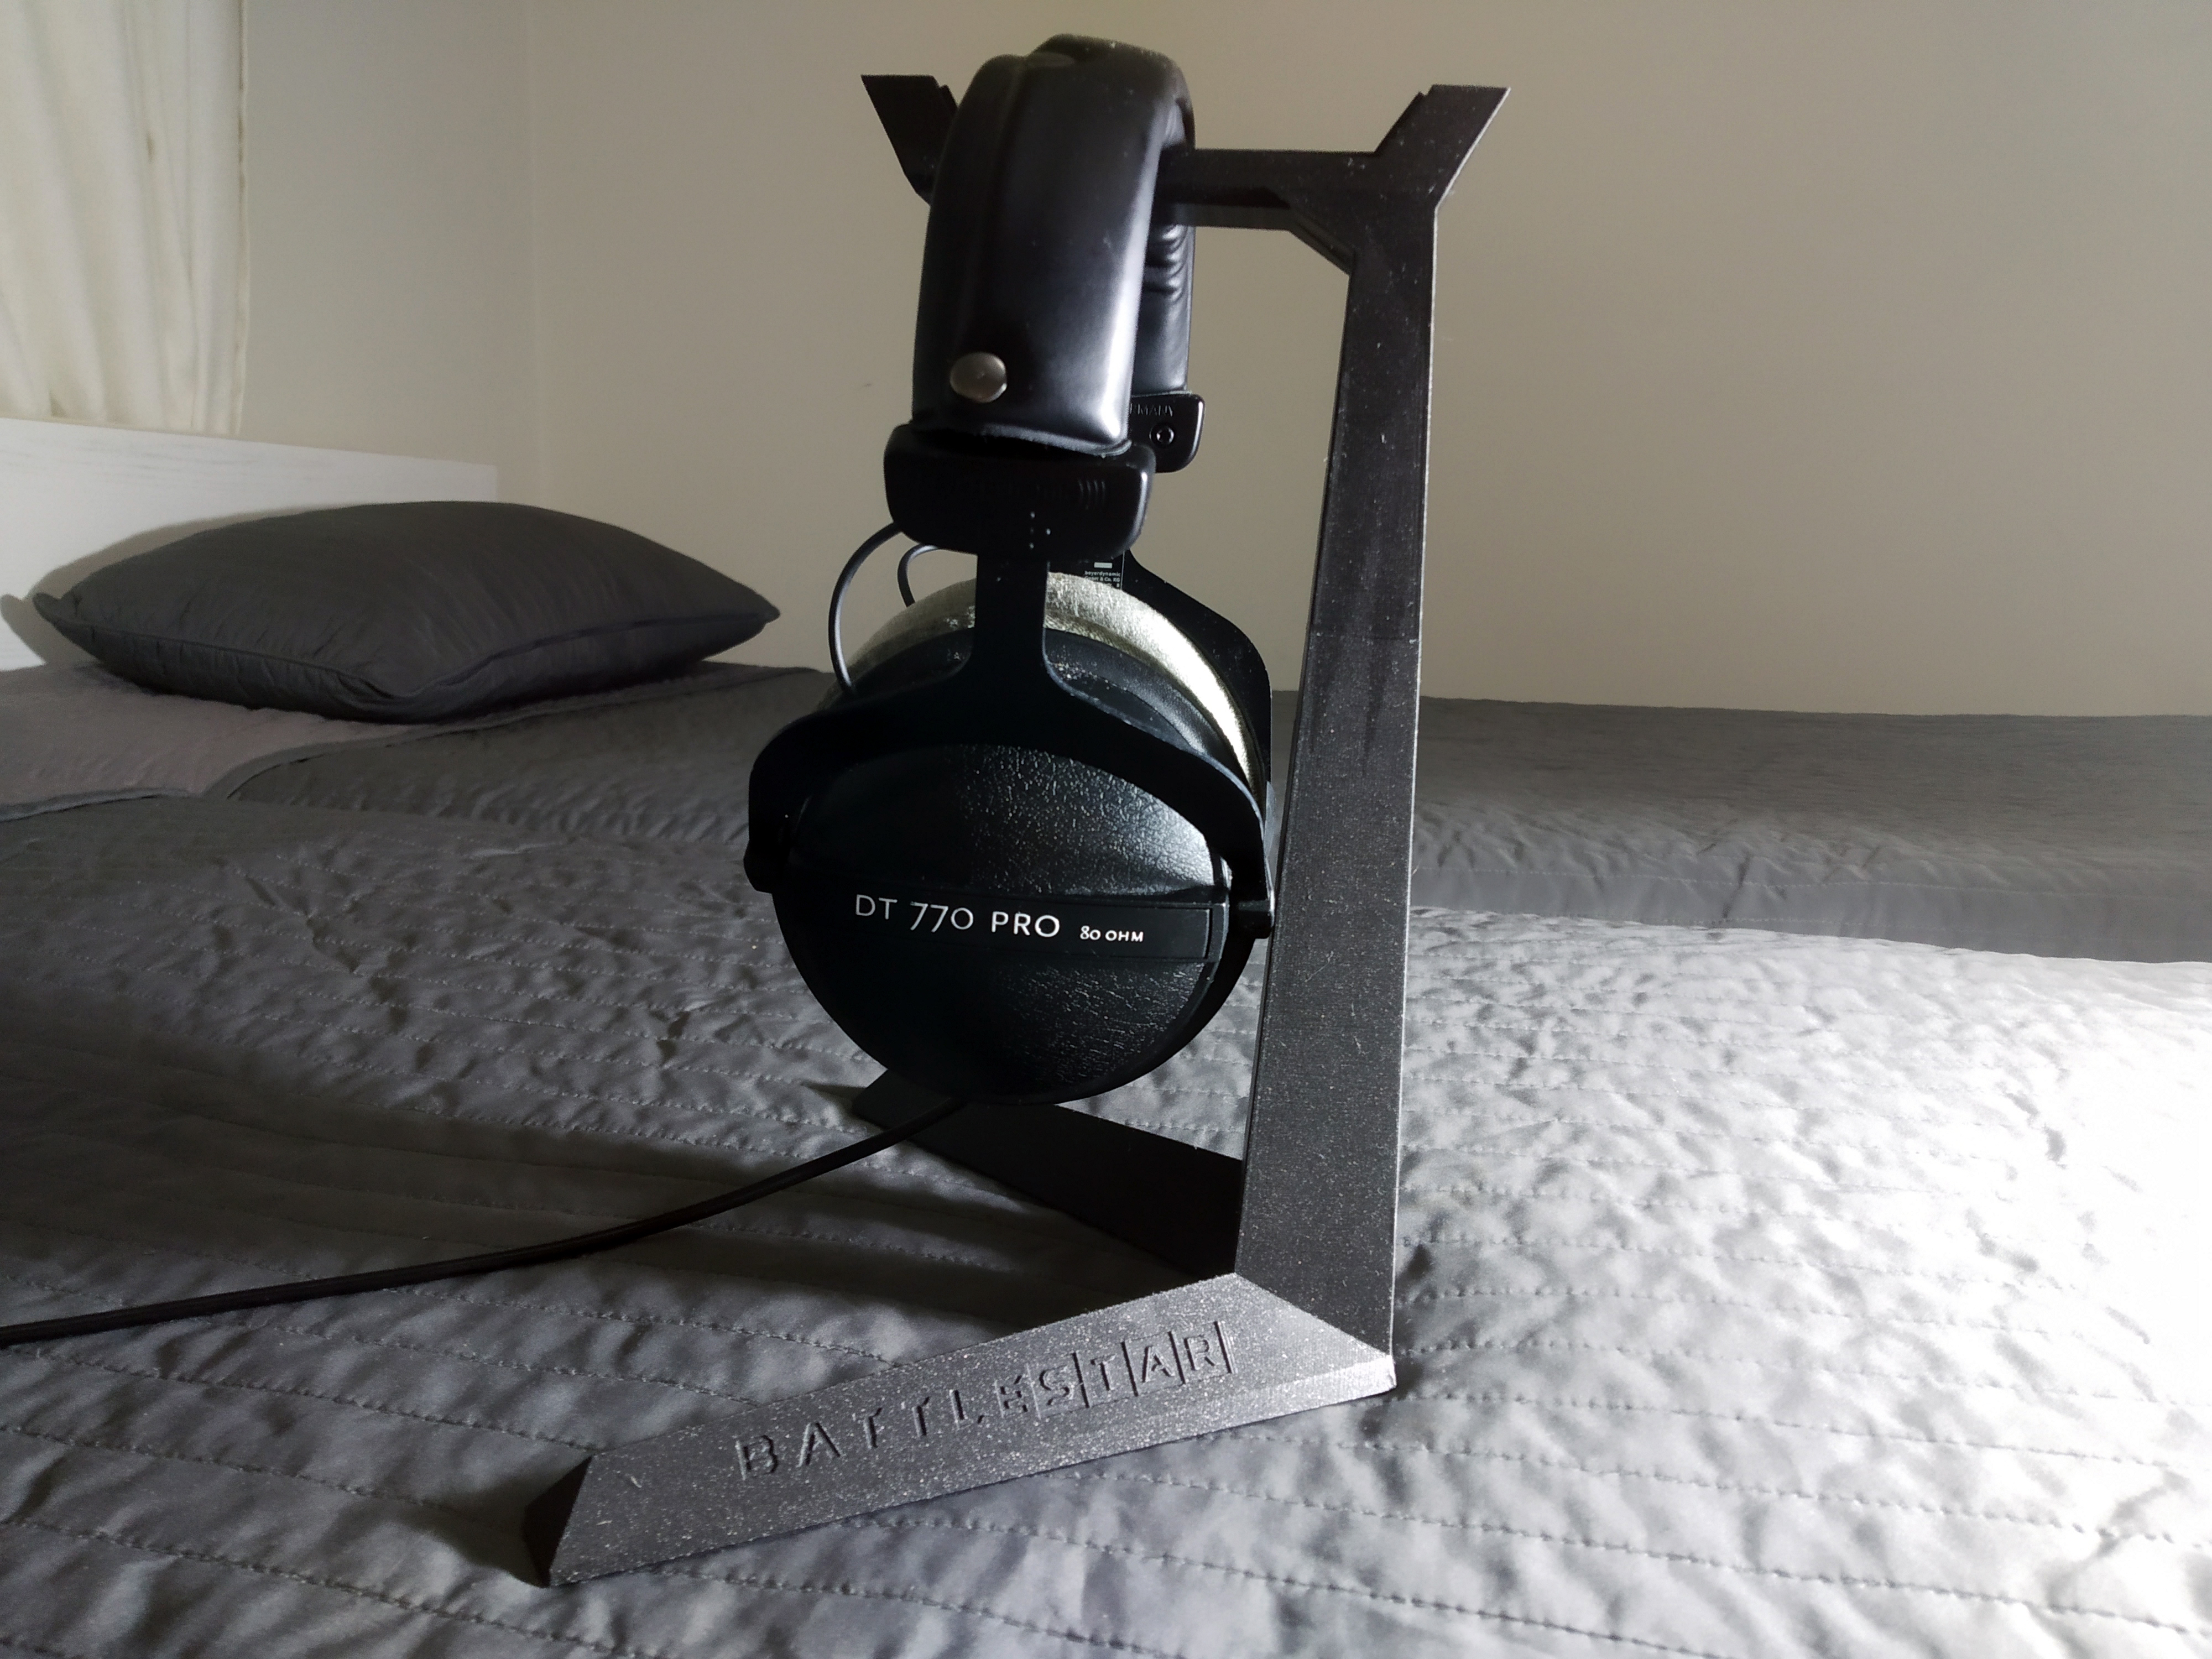 BattleSTAR - The first and last 'GAMING' headset stand you'll ever need!